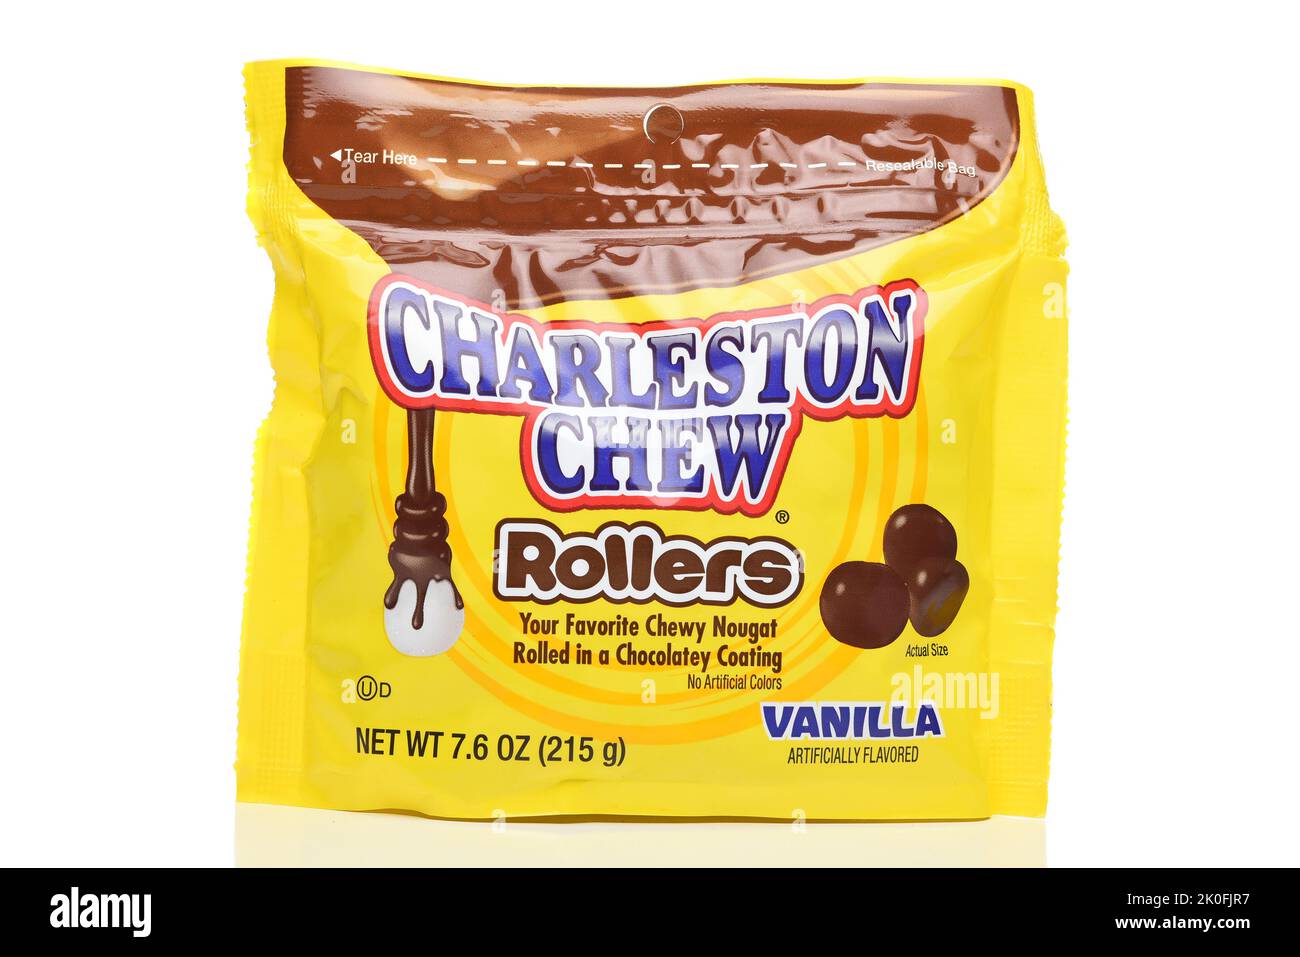 IRVINE, CALIFORNIA - 10 SEPT 2022: A bag of Charleston Chew Rollers. Stock Photo